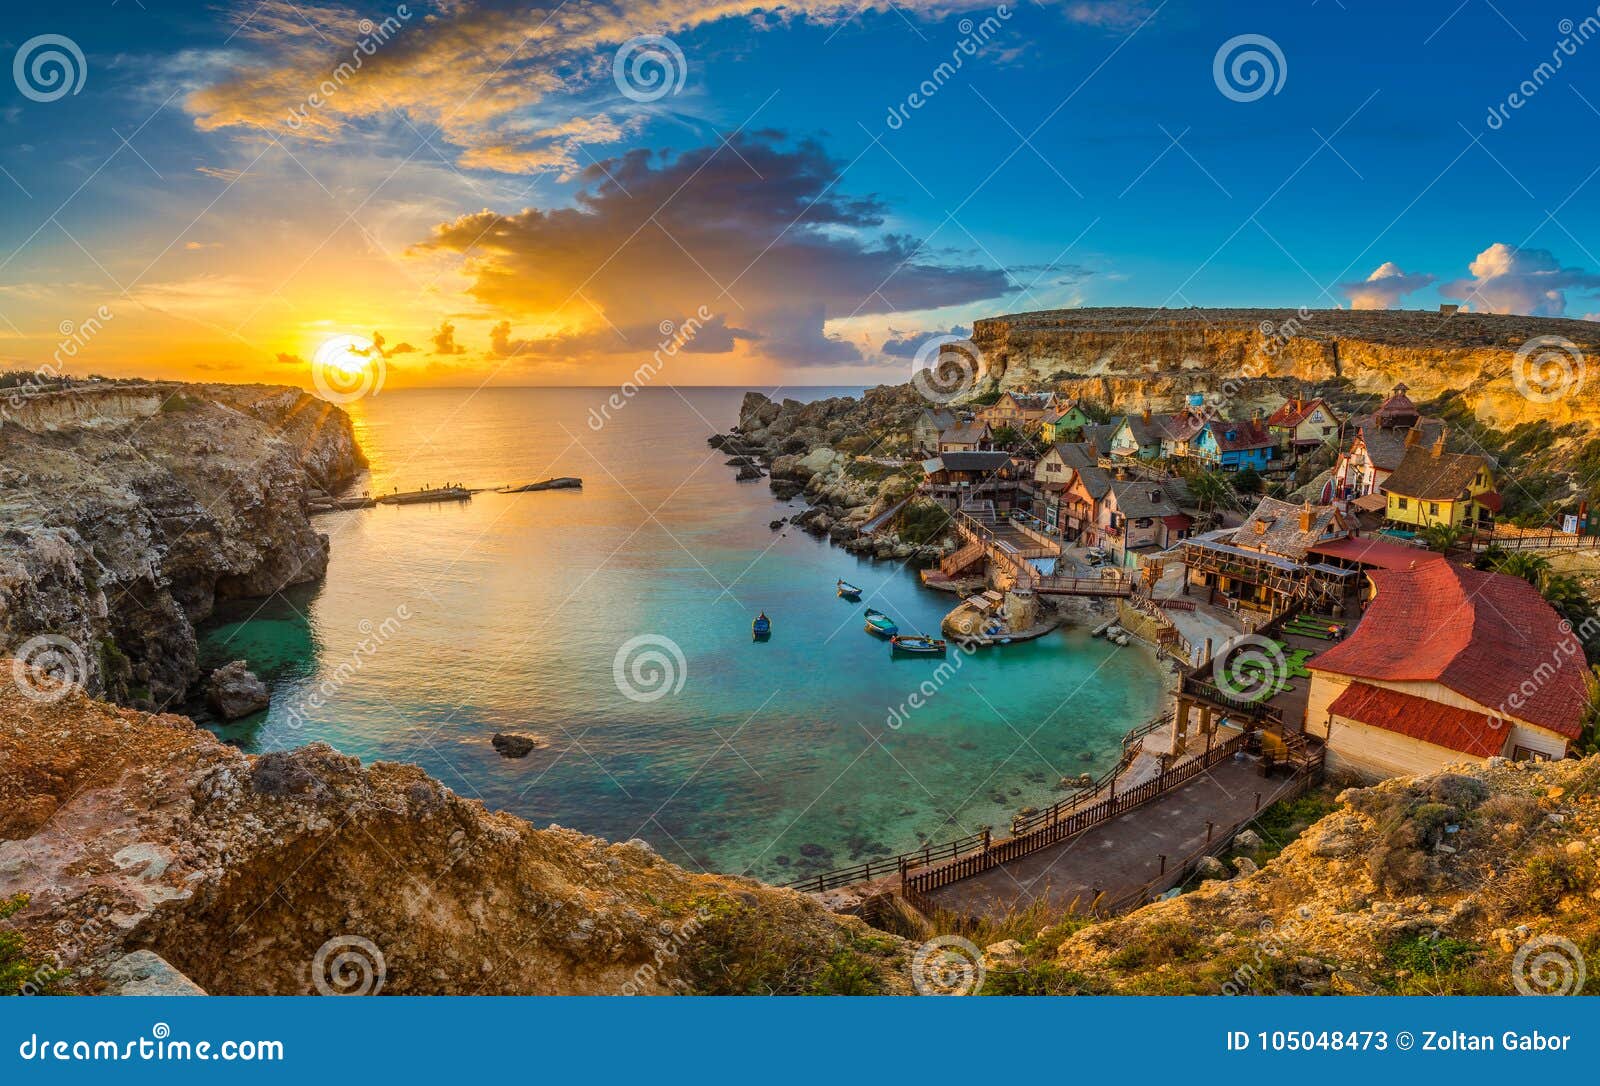 il-mellieha, malta - panoramic skyline view of the famous popeye village at anchor bay at sunset